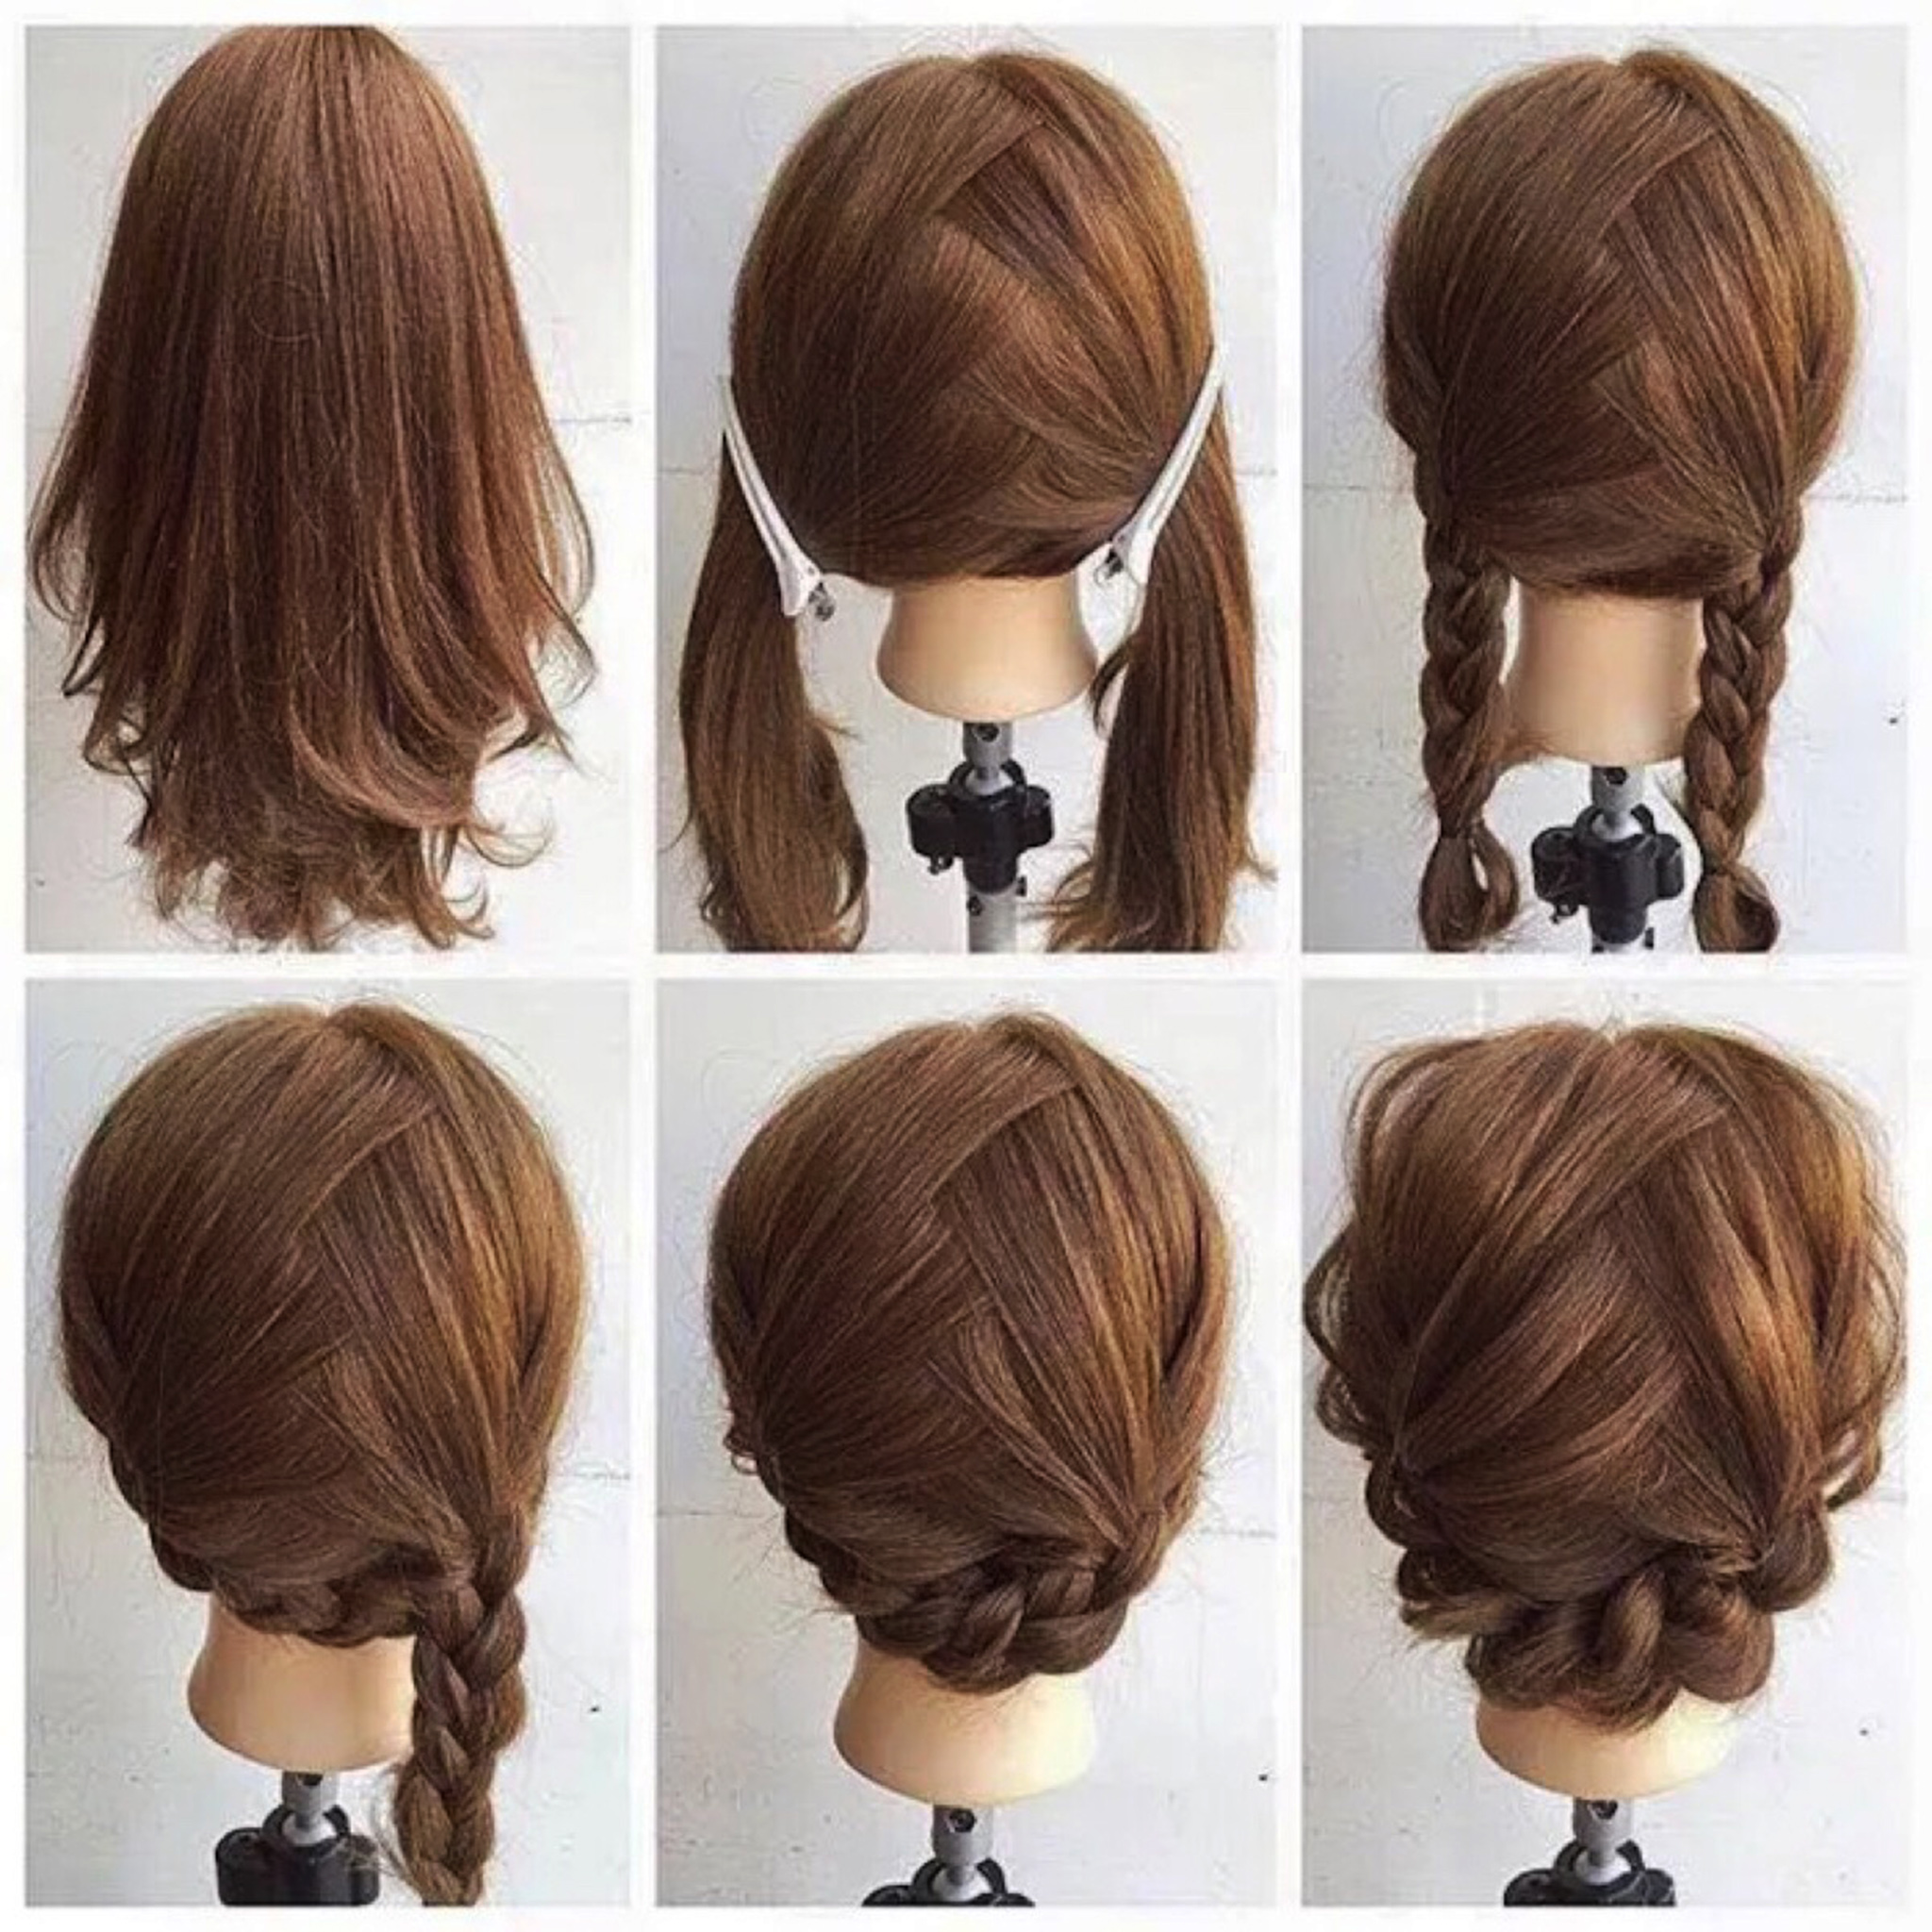 Fashionable Braid Hairstyle For Shoulder Length Hair Gymbuddy Now